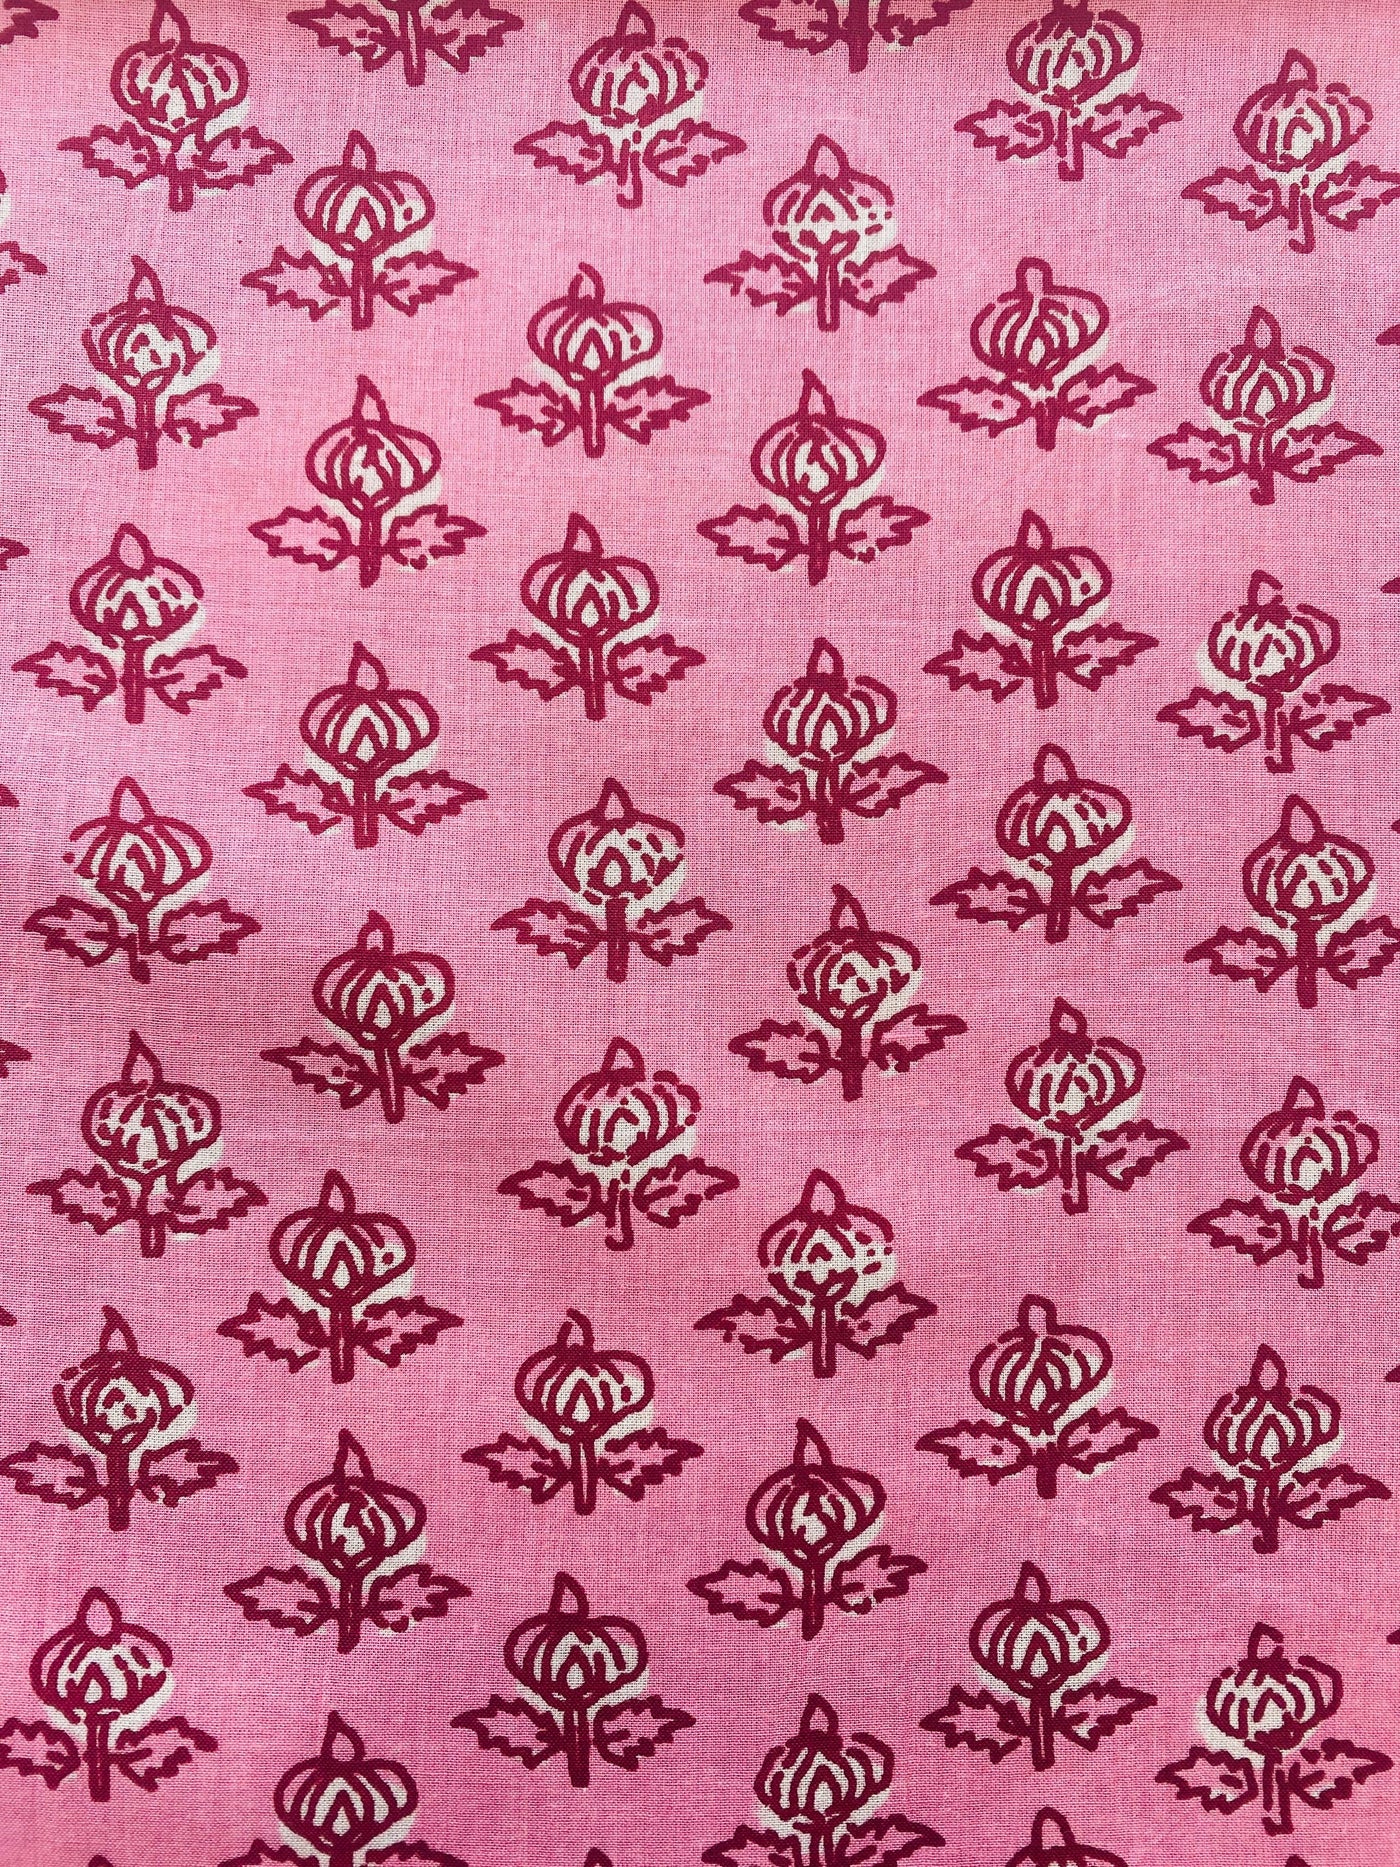 Watermelon Pink, Current Red Indian Floral Hand Printed 100% Pure Soft Cotton Cloth Napkins, 18x18"-Cocktail Napkins, 20x20"- Dinner Napkins